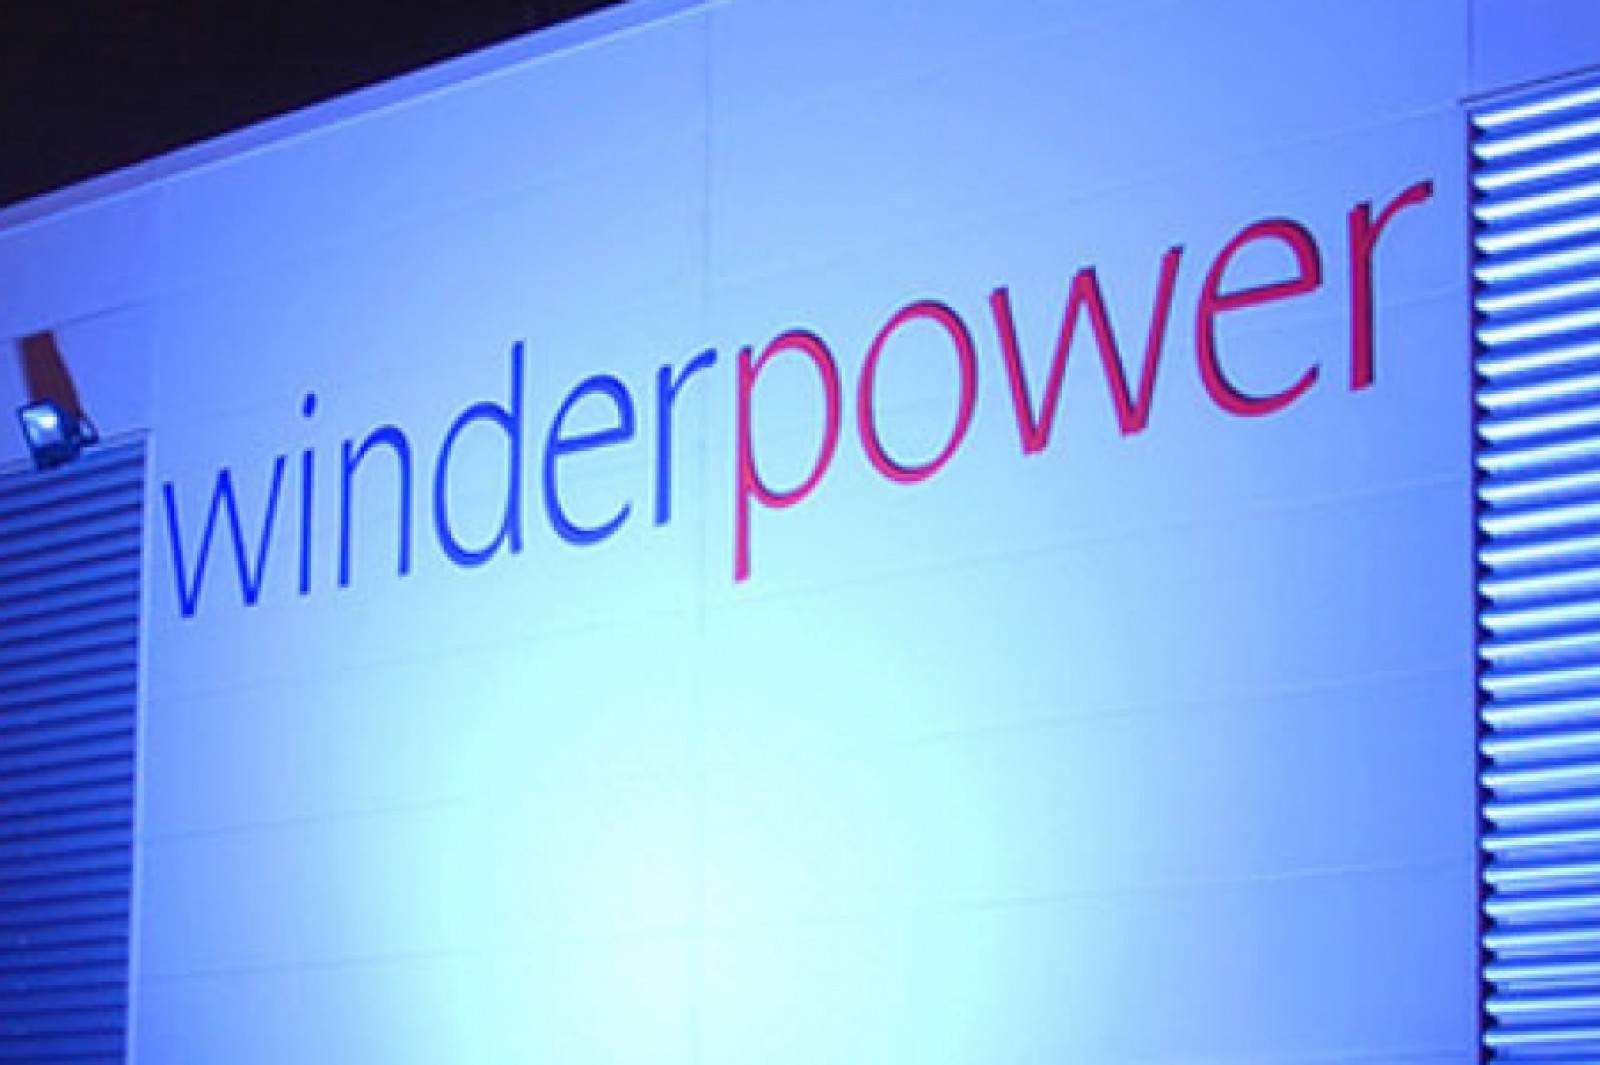 Winder Power on the Map for Fair Tax